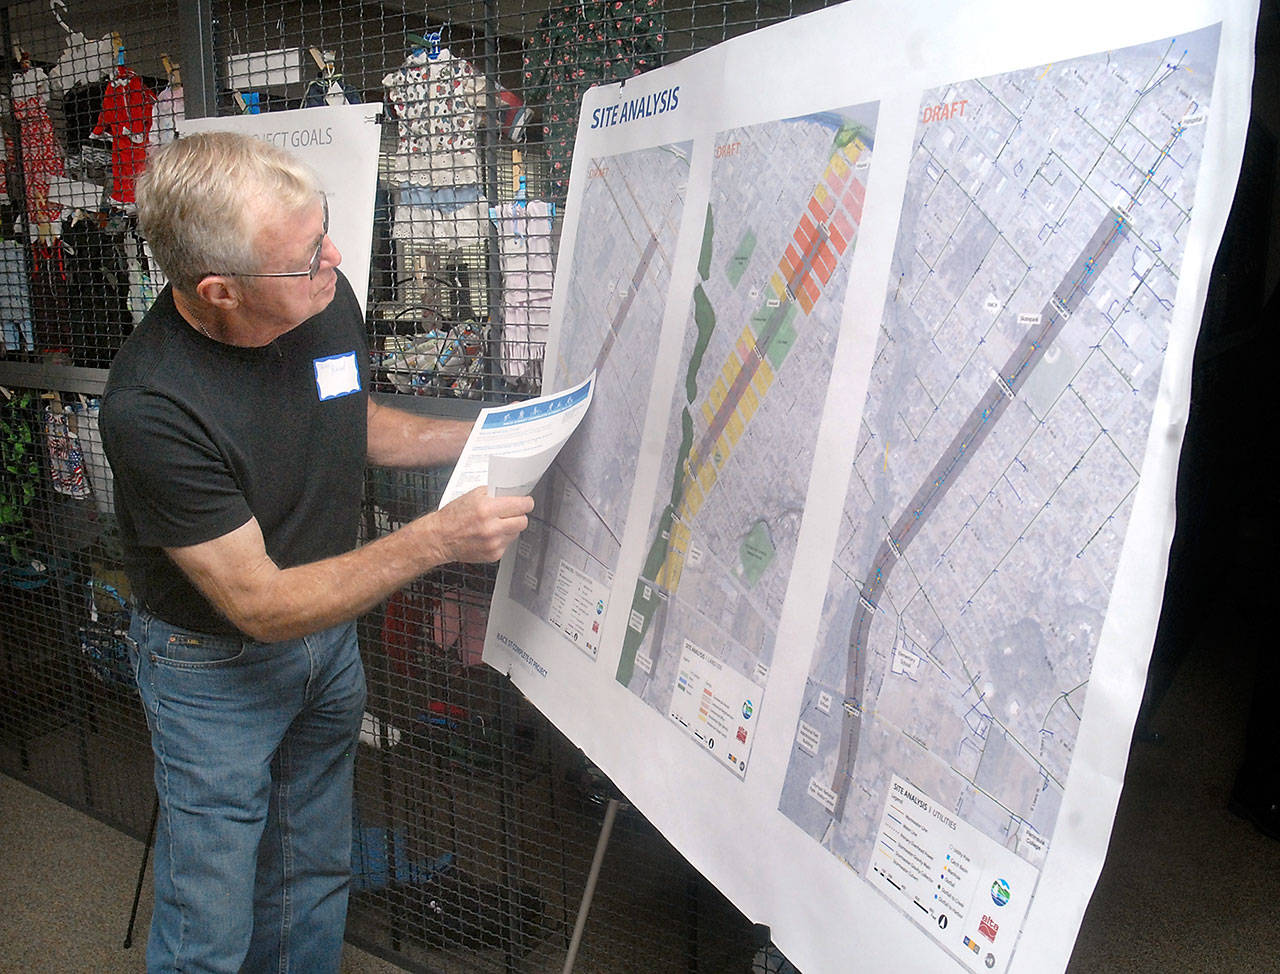 Jim Reed of Sequim examines a set of maps of the Race Street corridor during an open house at the Port Angeles Senior & Community Center on Tuesday about potential changes to the route between First Street and Hurricane Ridge Road. (Keith Thorpe/Peninsula Daily News)